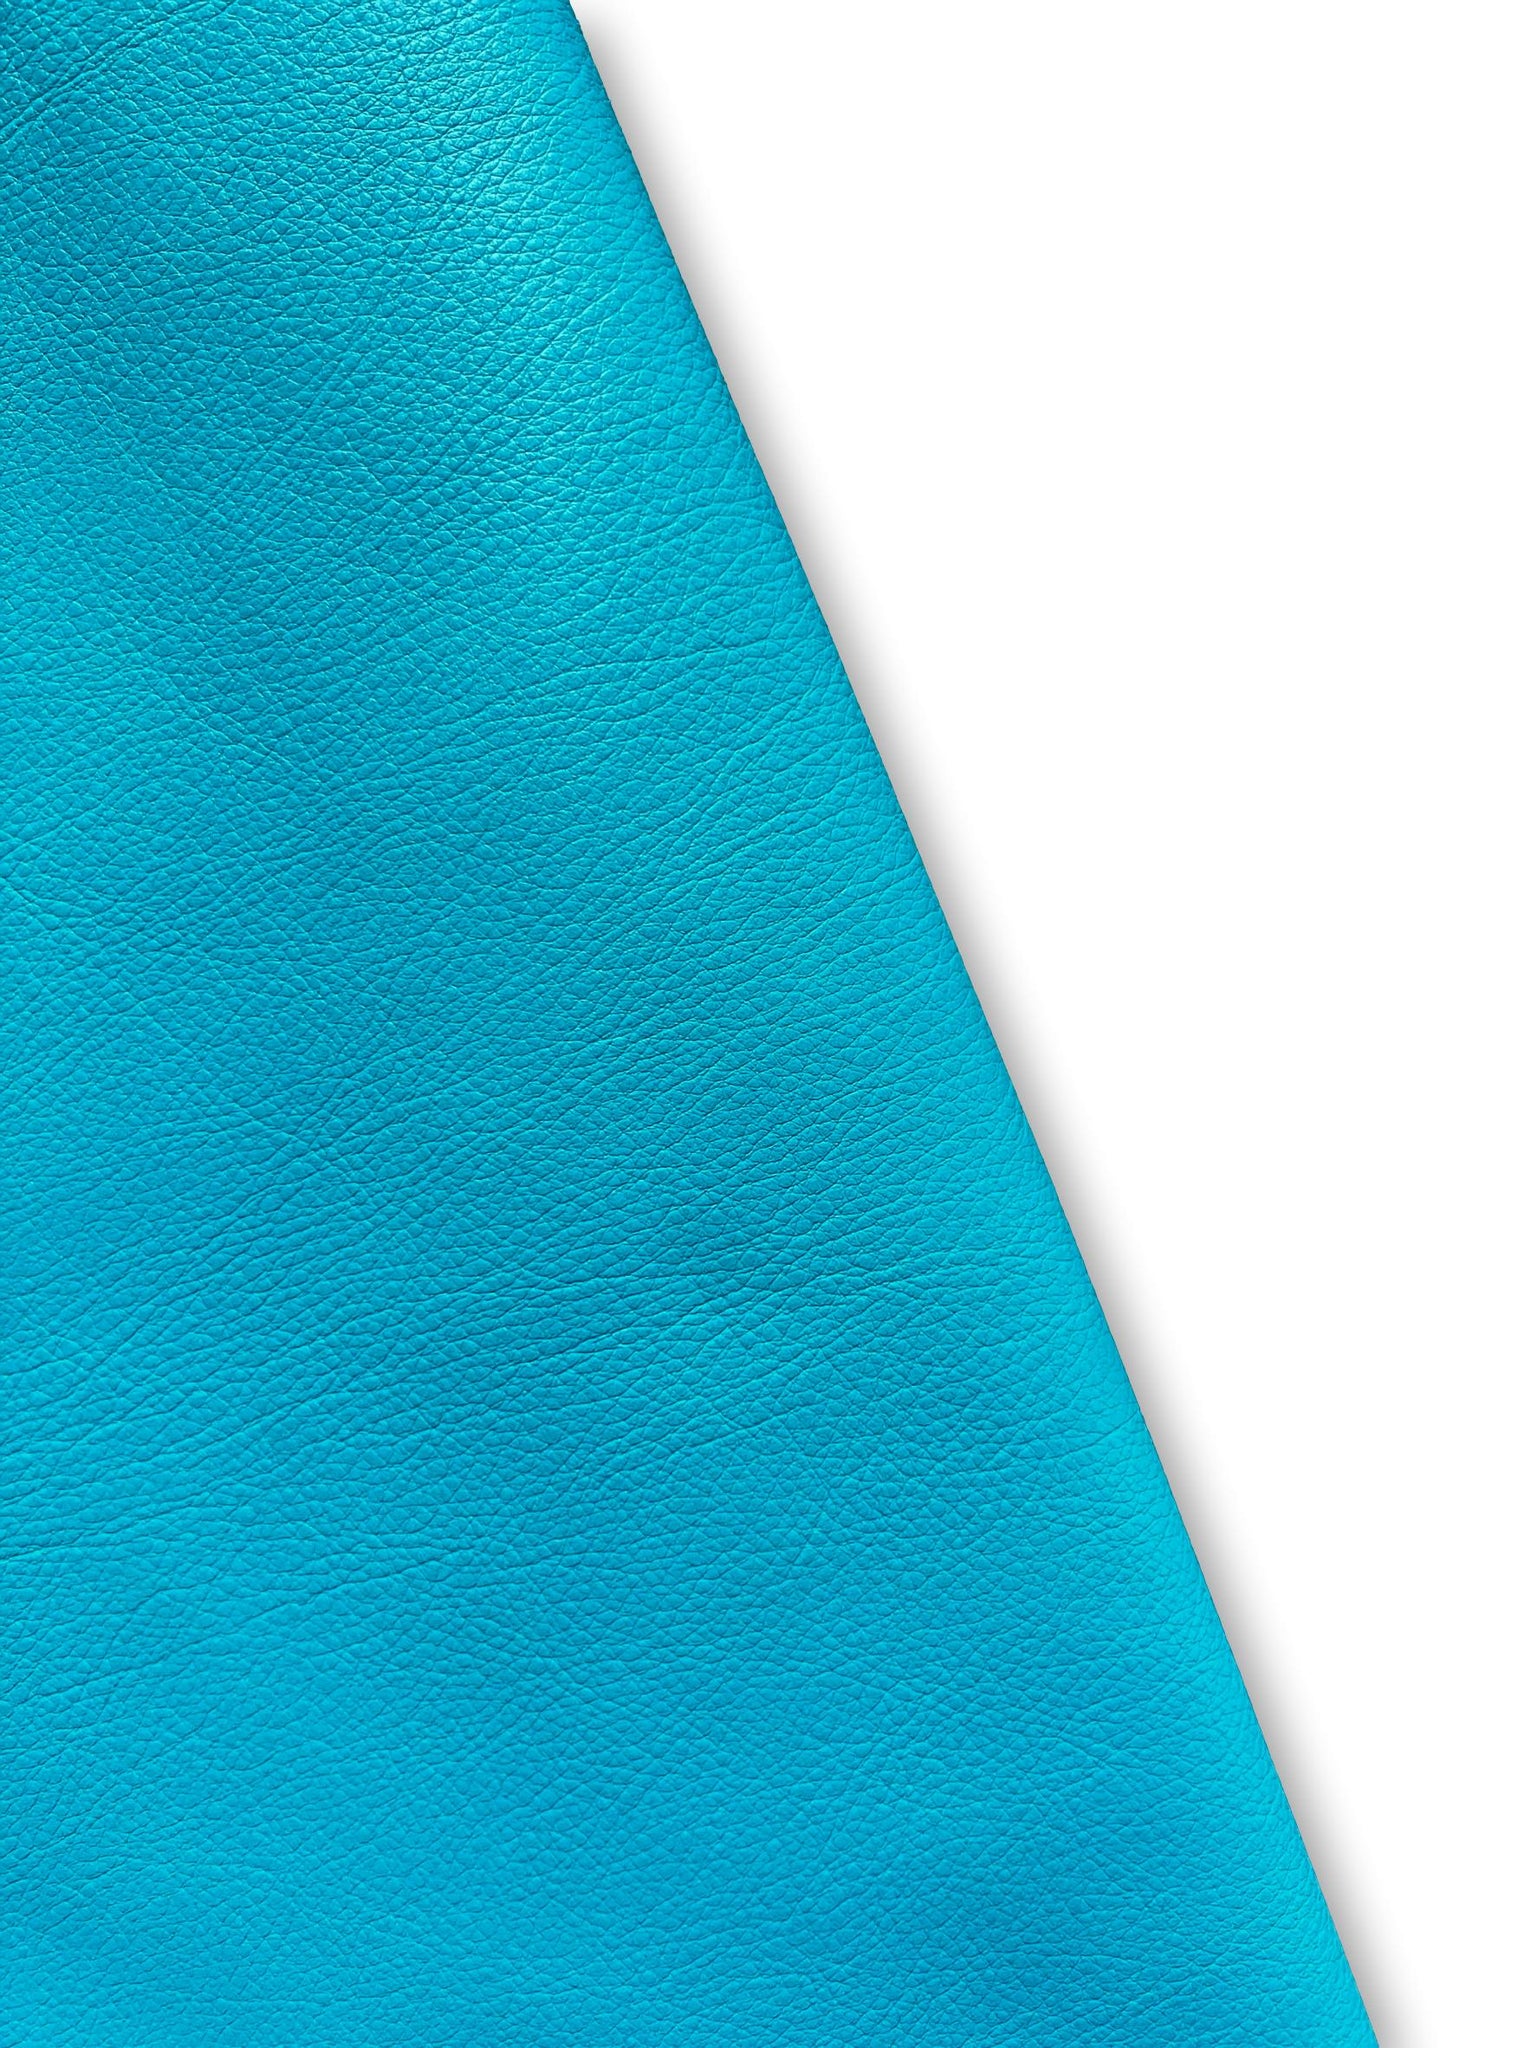 Turquoise Natural Grain Cowhide Leather Skins